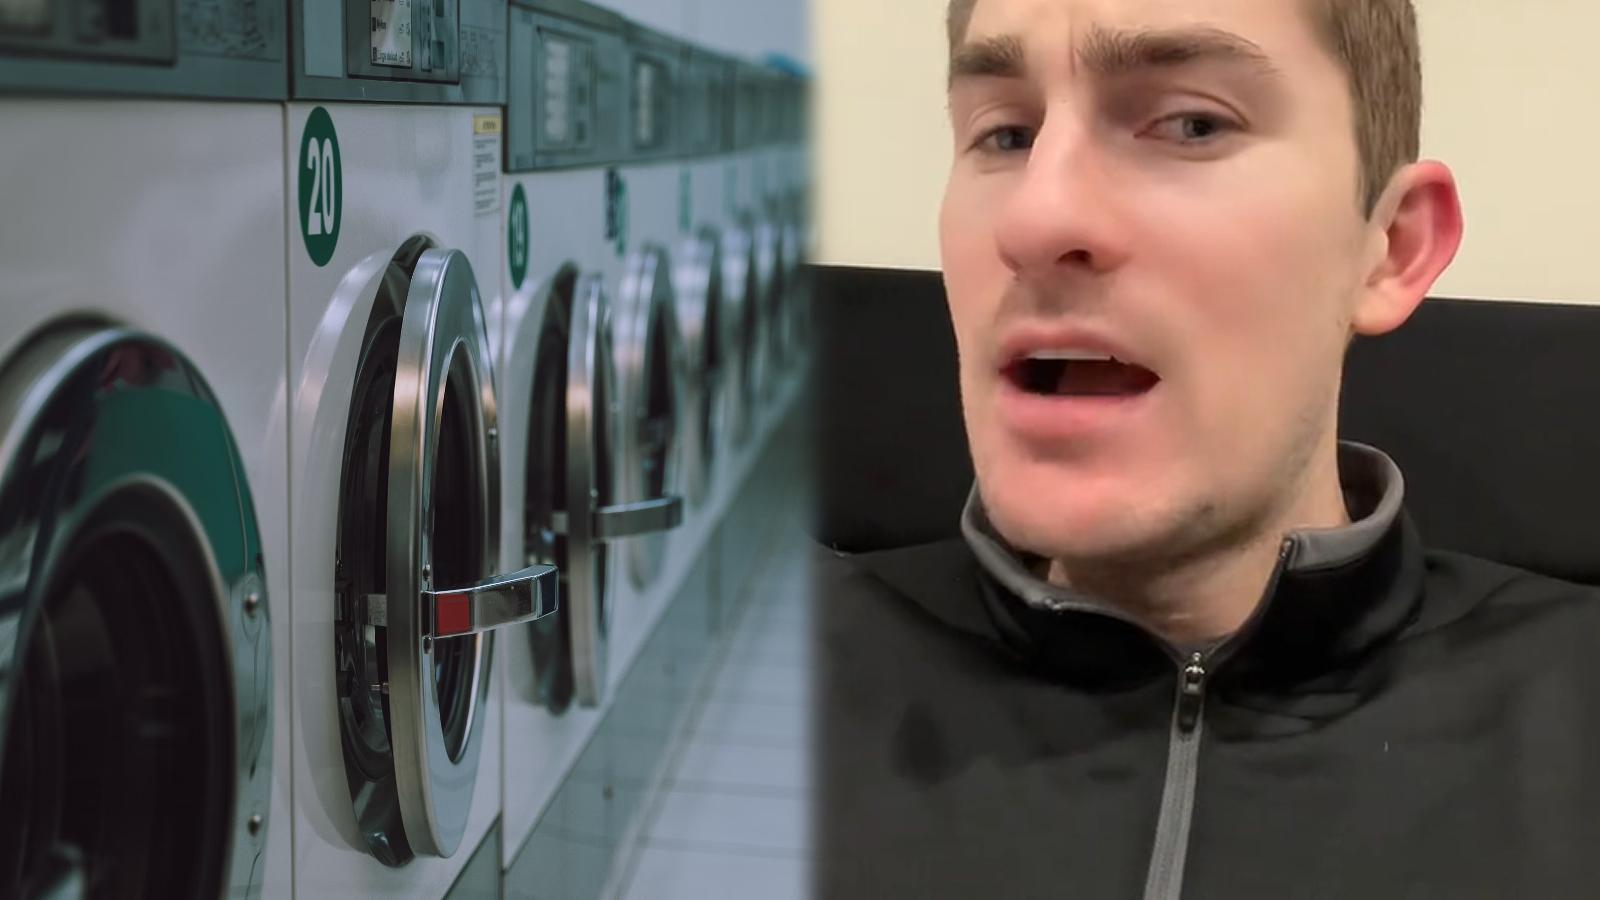 On the left, a photo of a laundromat. On the right, a shocked Airbnb host.